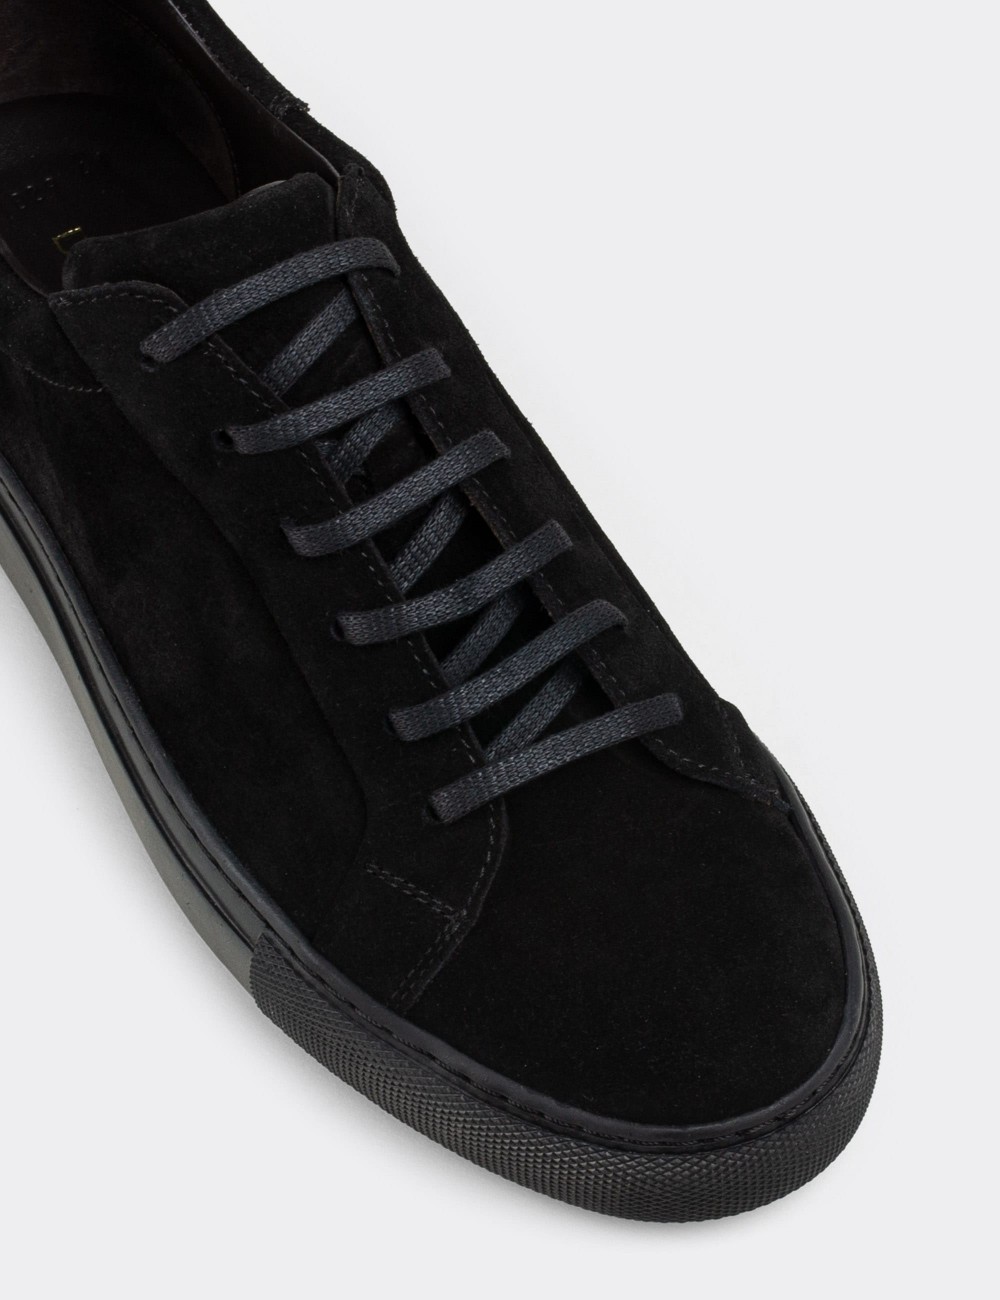 Black Suede Leather Sneakers - 01829MSYHC01